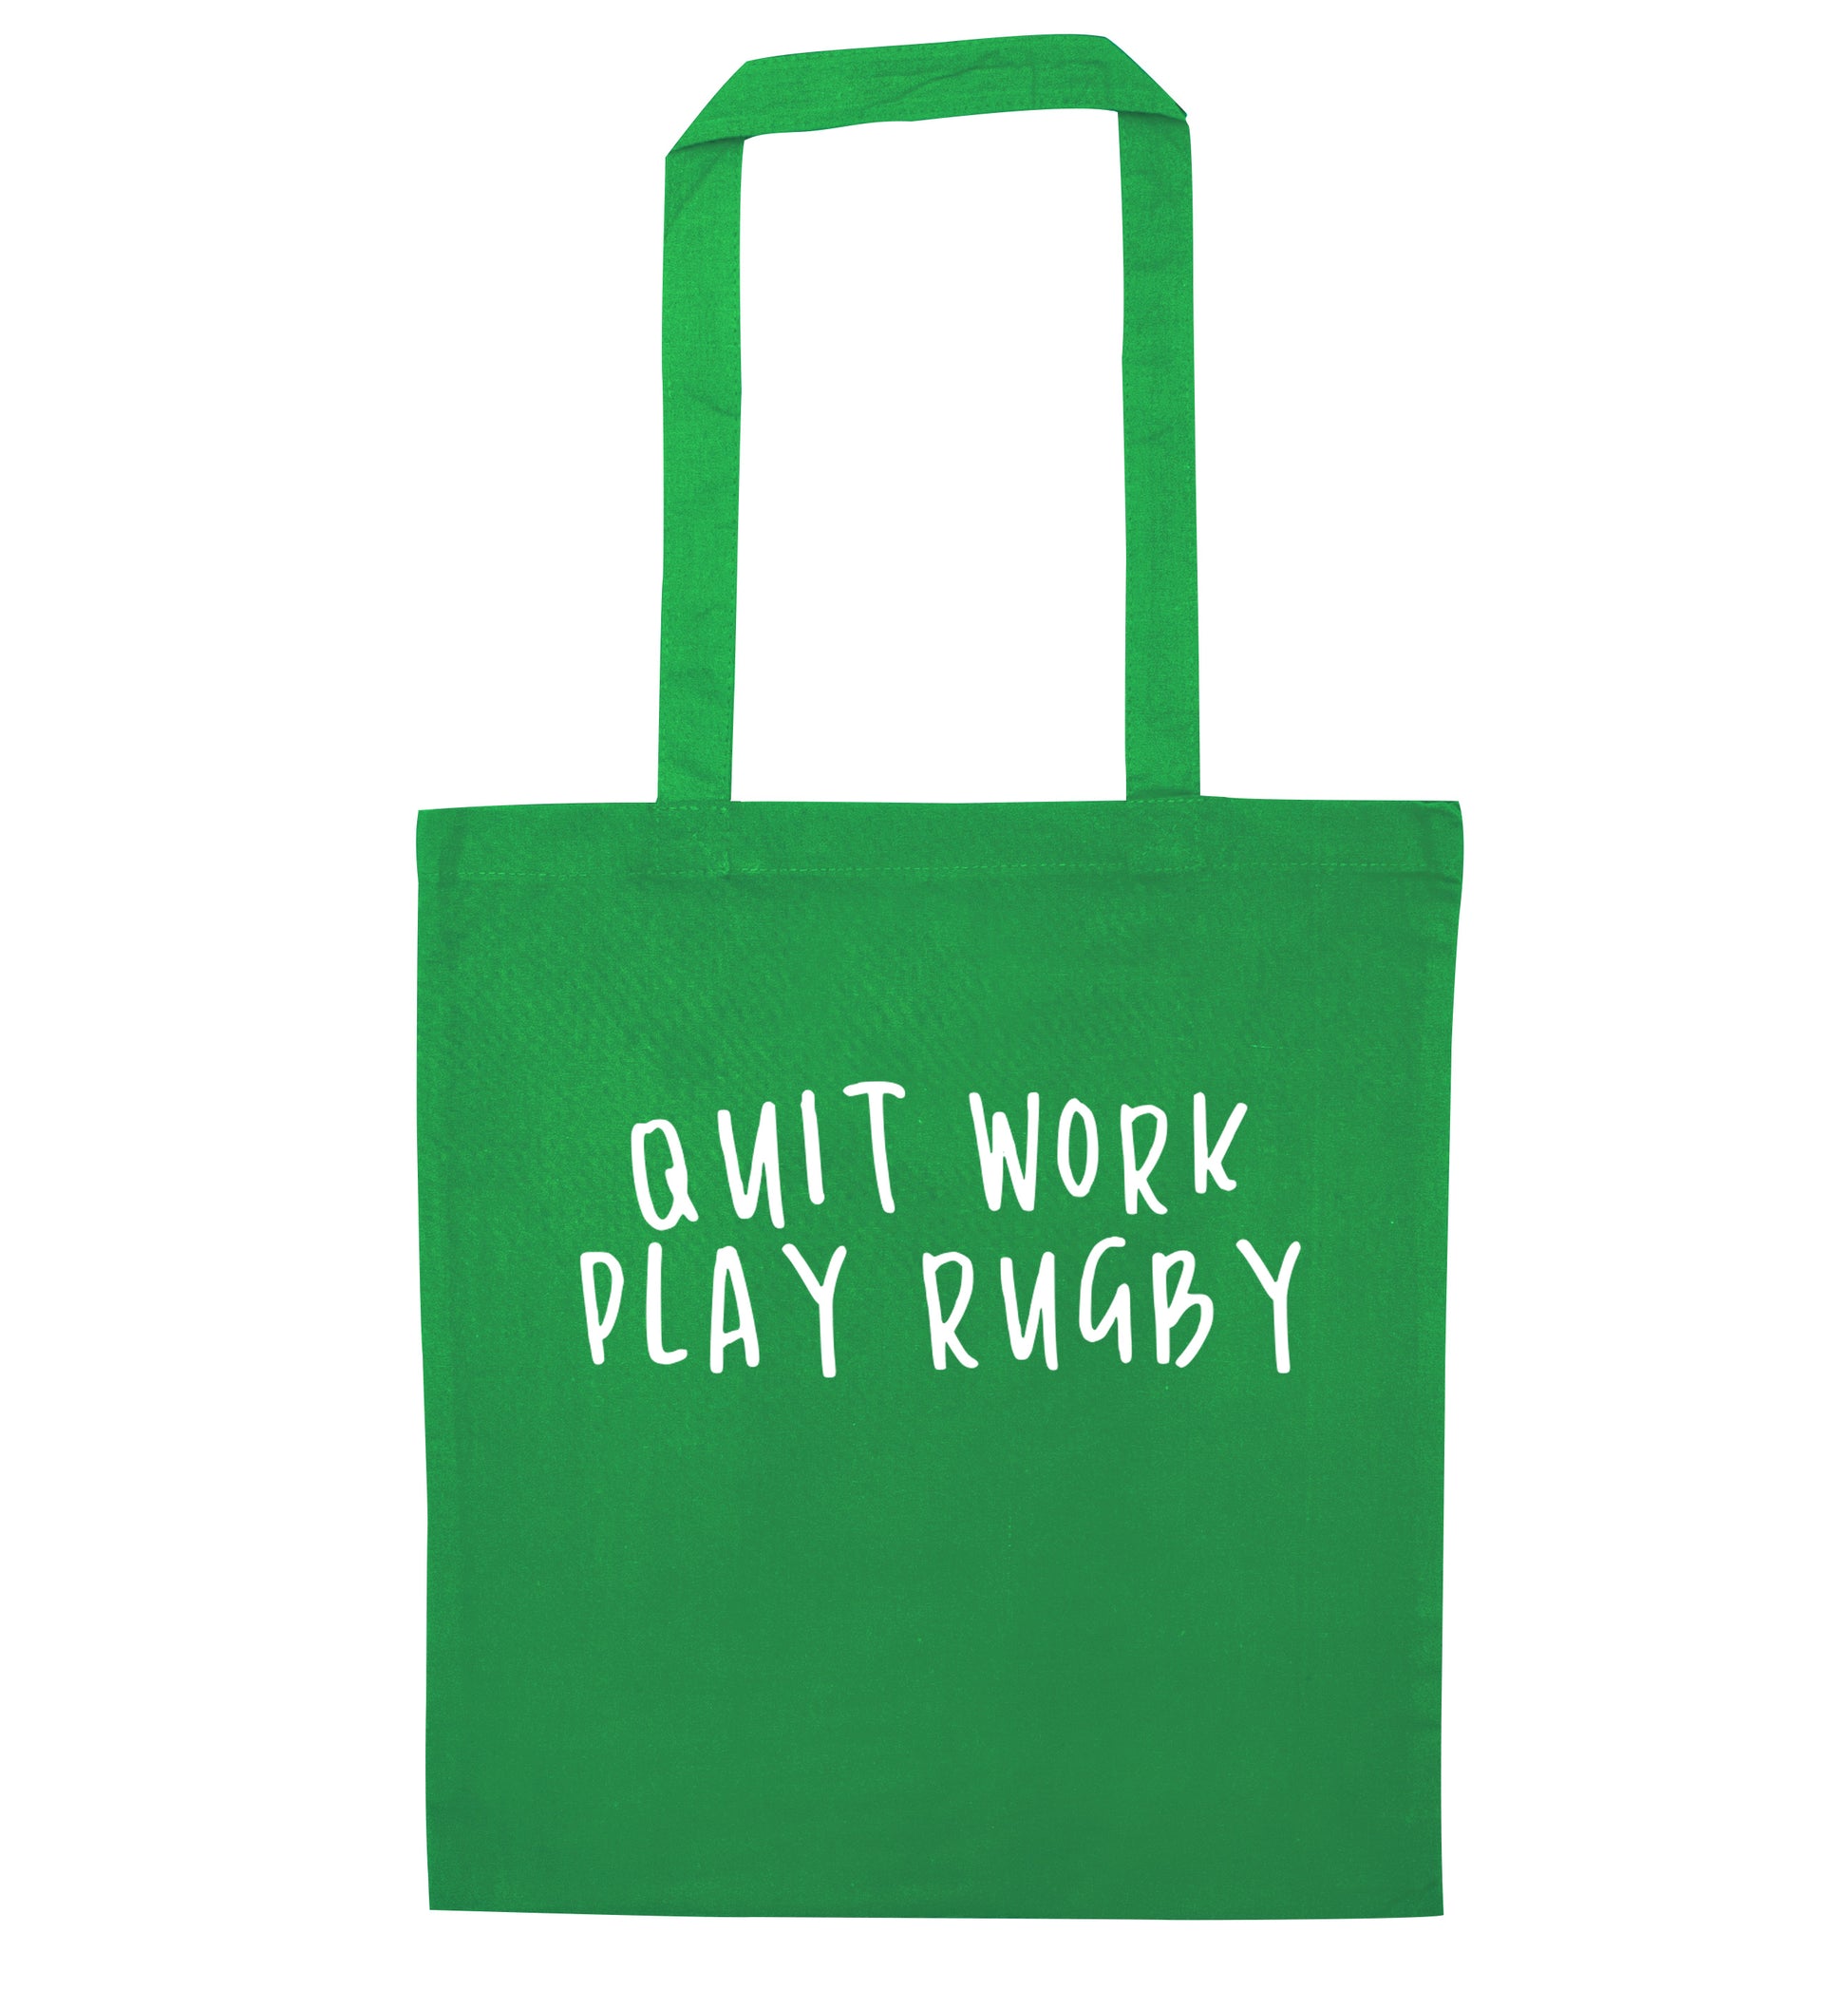 Quit work play rugby green tote bag